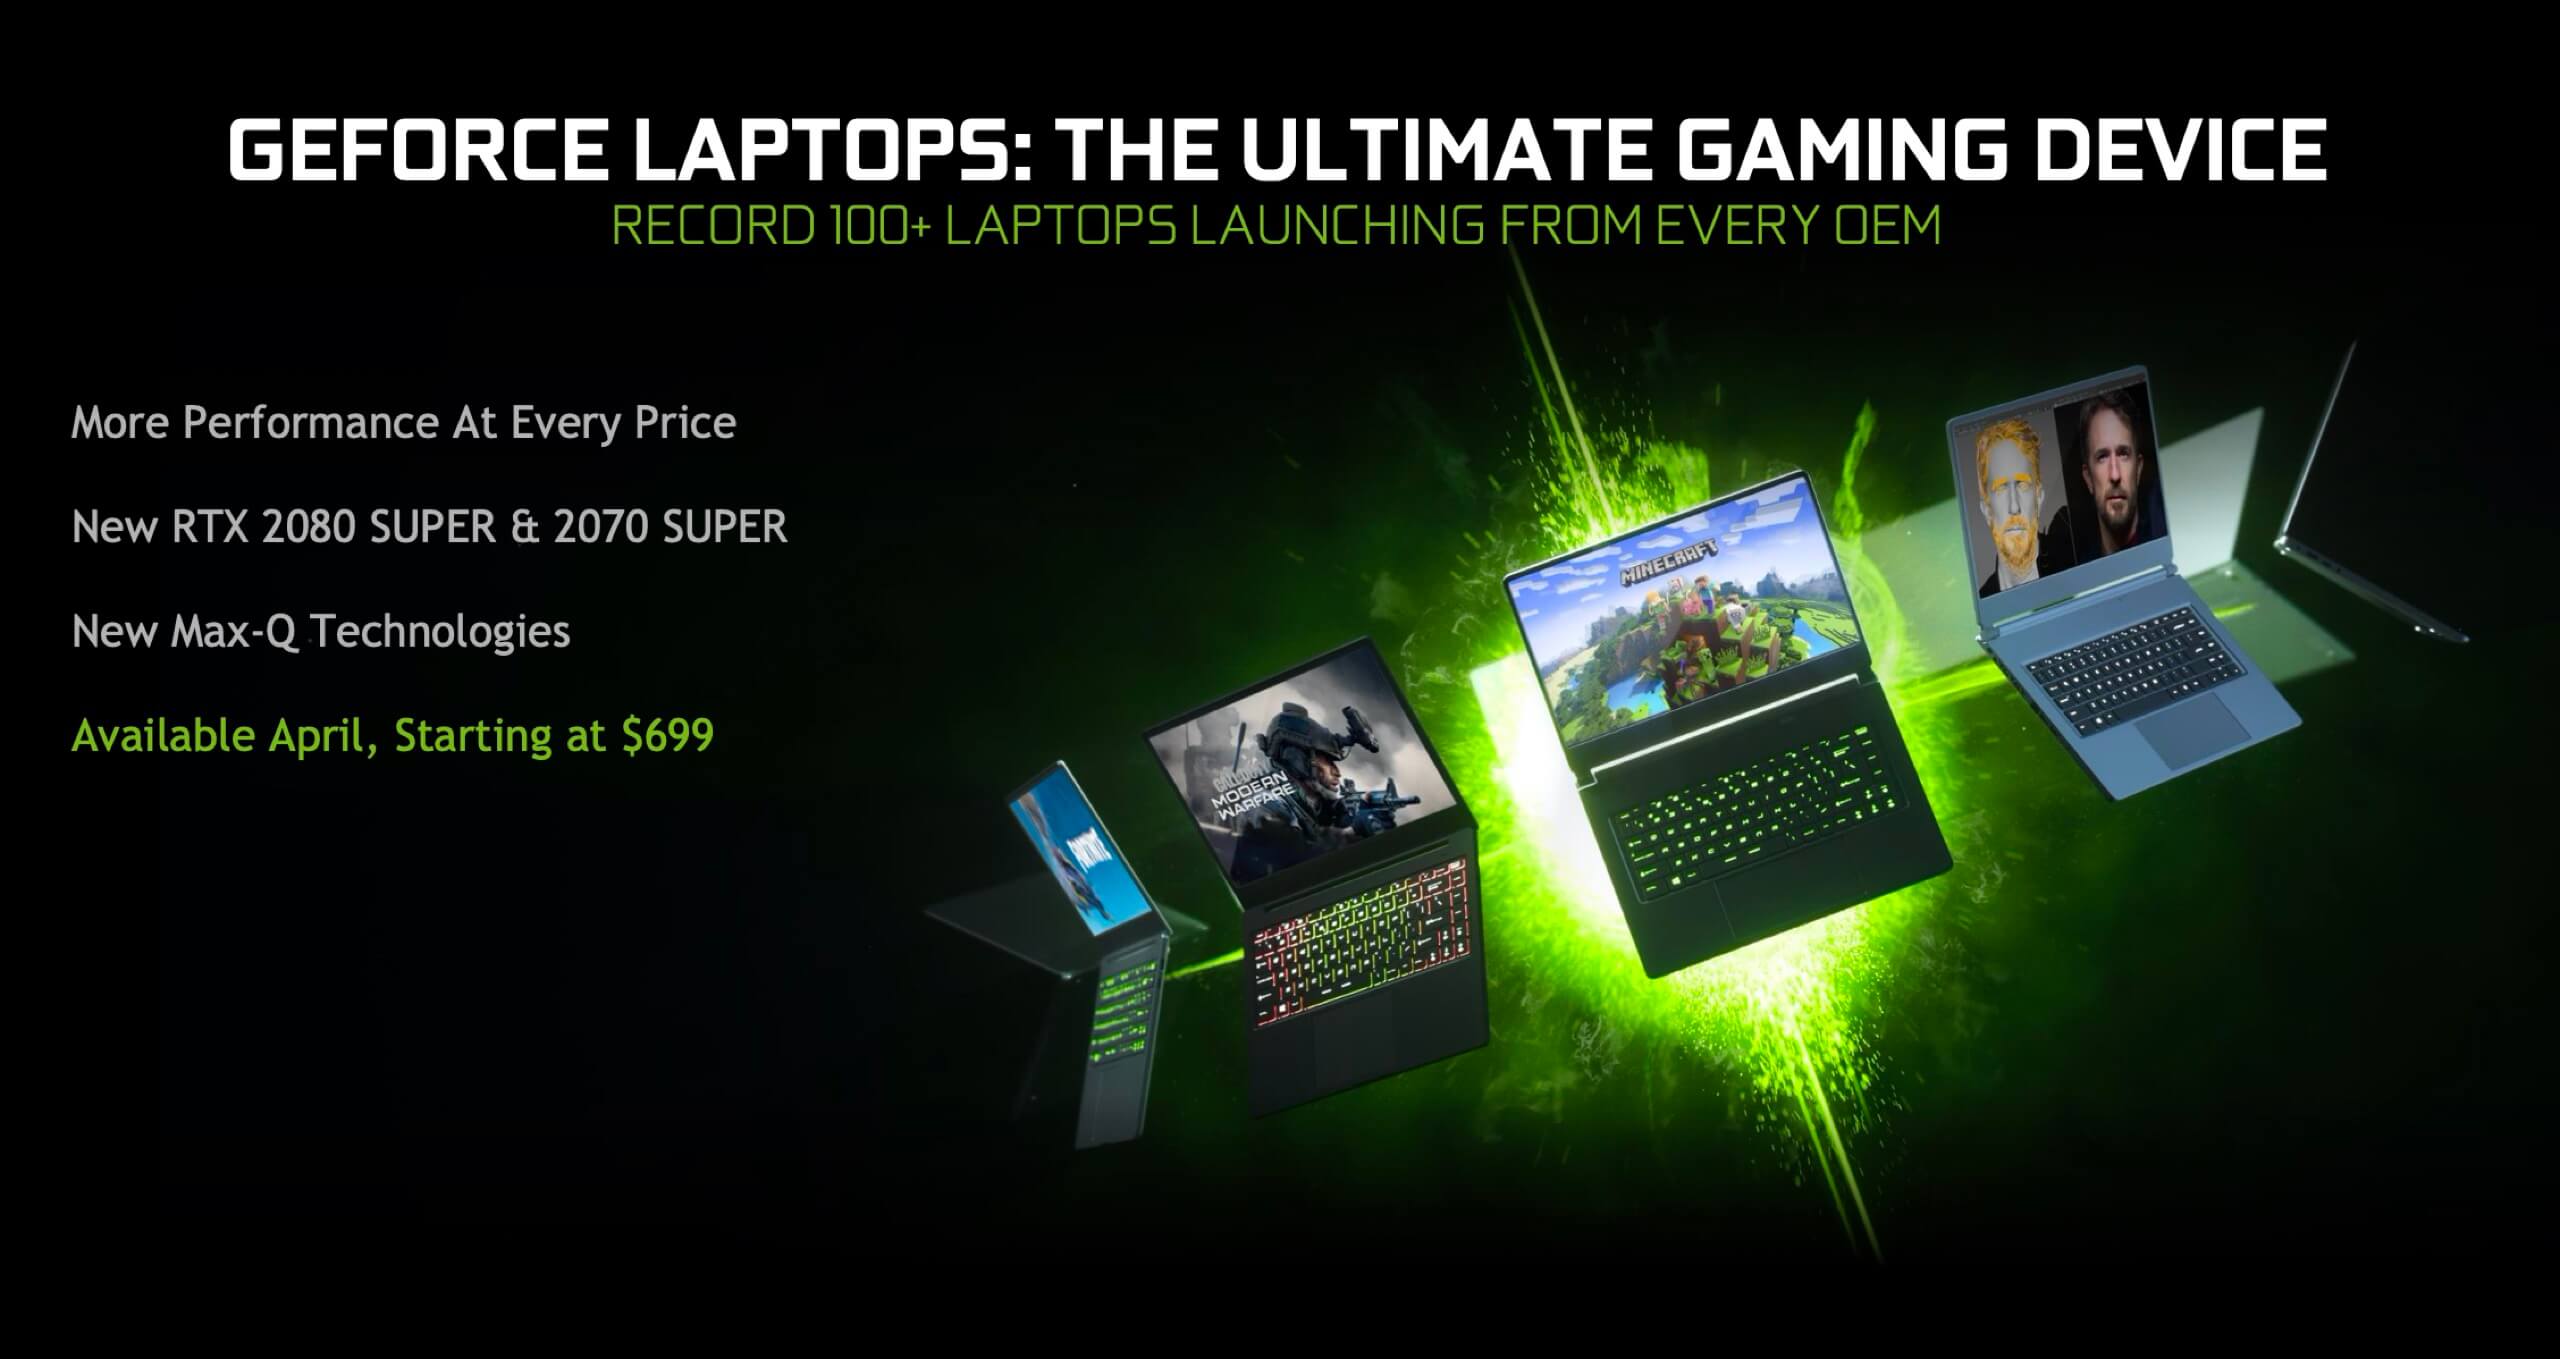 Nvidia goes Super with new GeForce RTX GPUs for gaming laptops 2